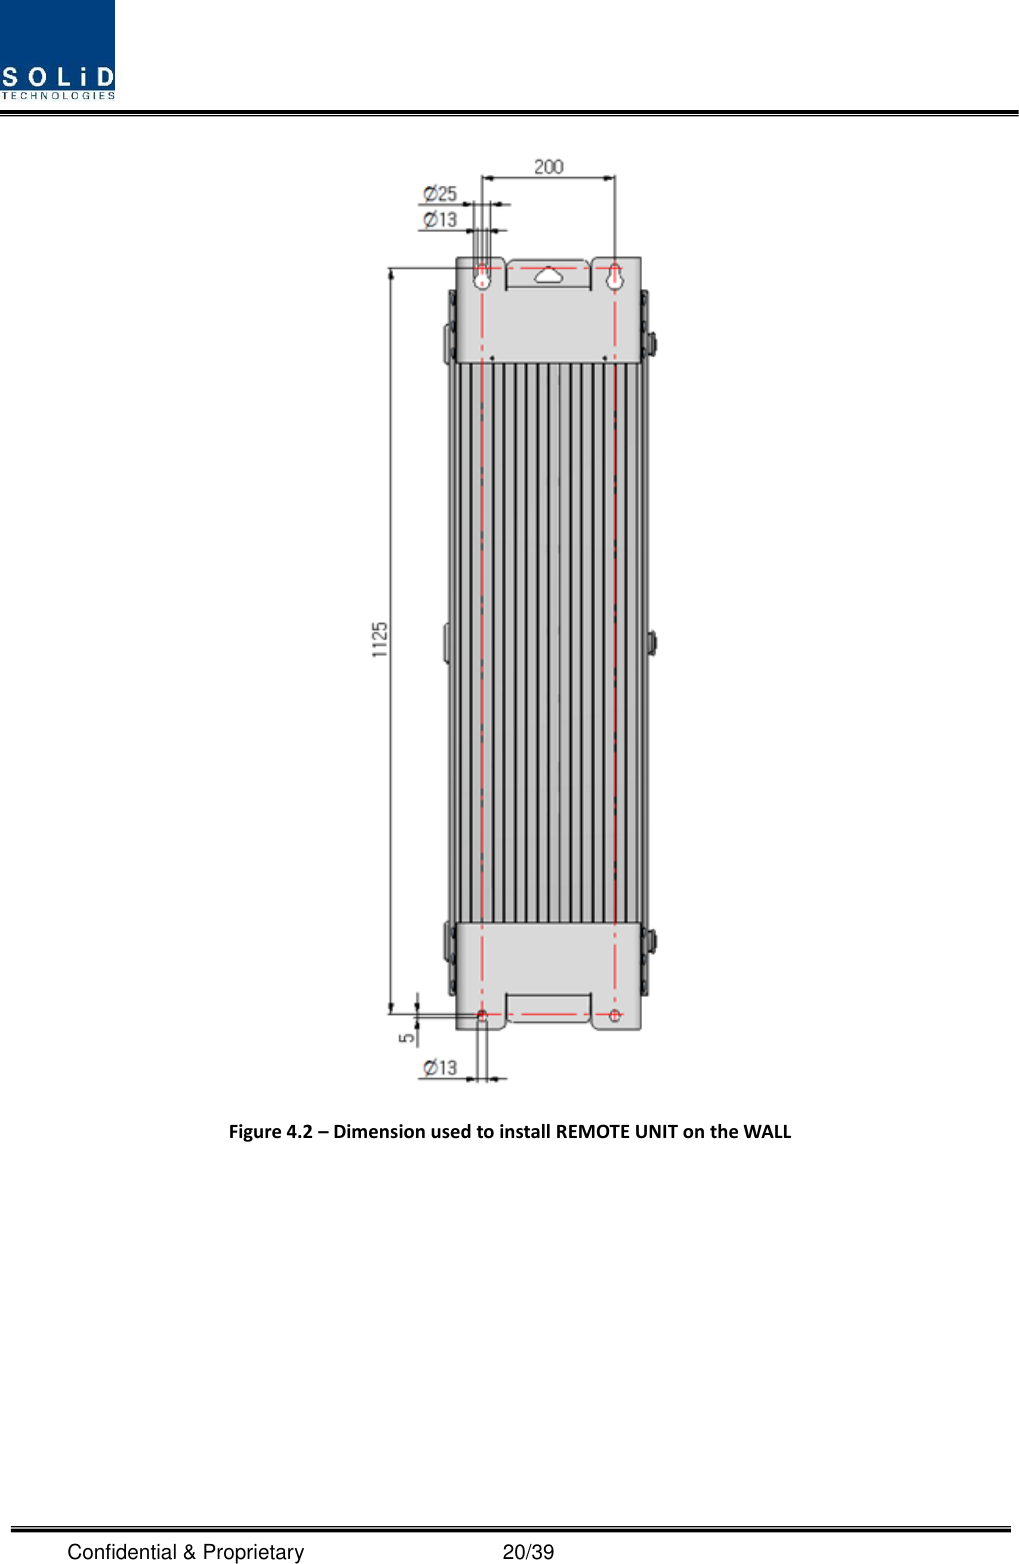  Confidential &amp; Proprietary                                      20/39  Figure 4.2 – Dimension used to install REMOTE UNIT on the WALL       